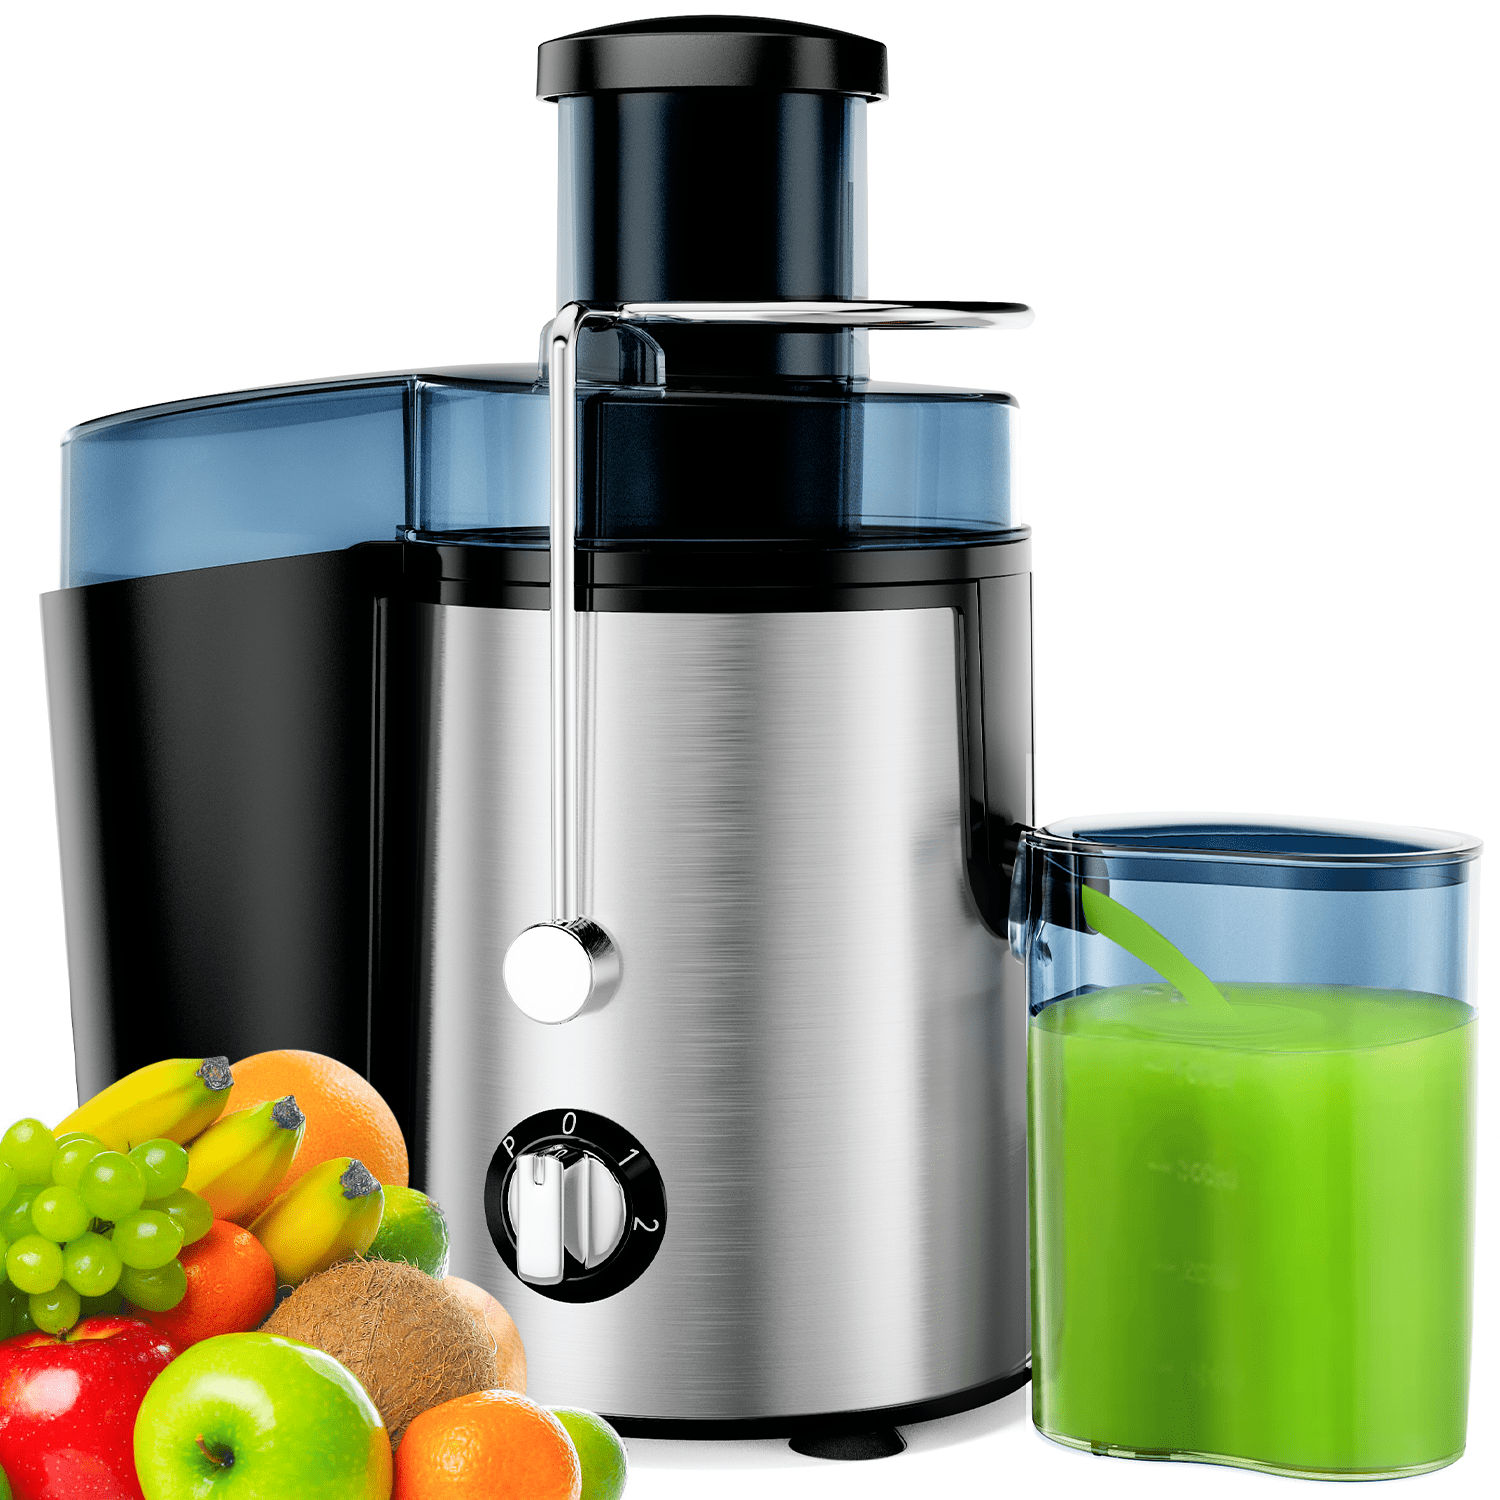 Juicer Machine, Centrifugal Juicer with 3 Feed Chute for Whole Fruits and  Vegetables, Juice Extractor Easy to Clean, 3 Speeds Control, Anti-Drip